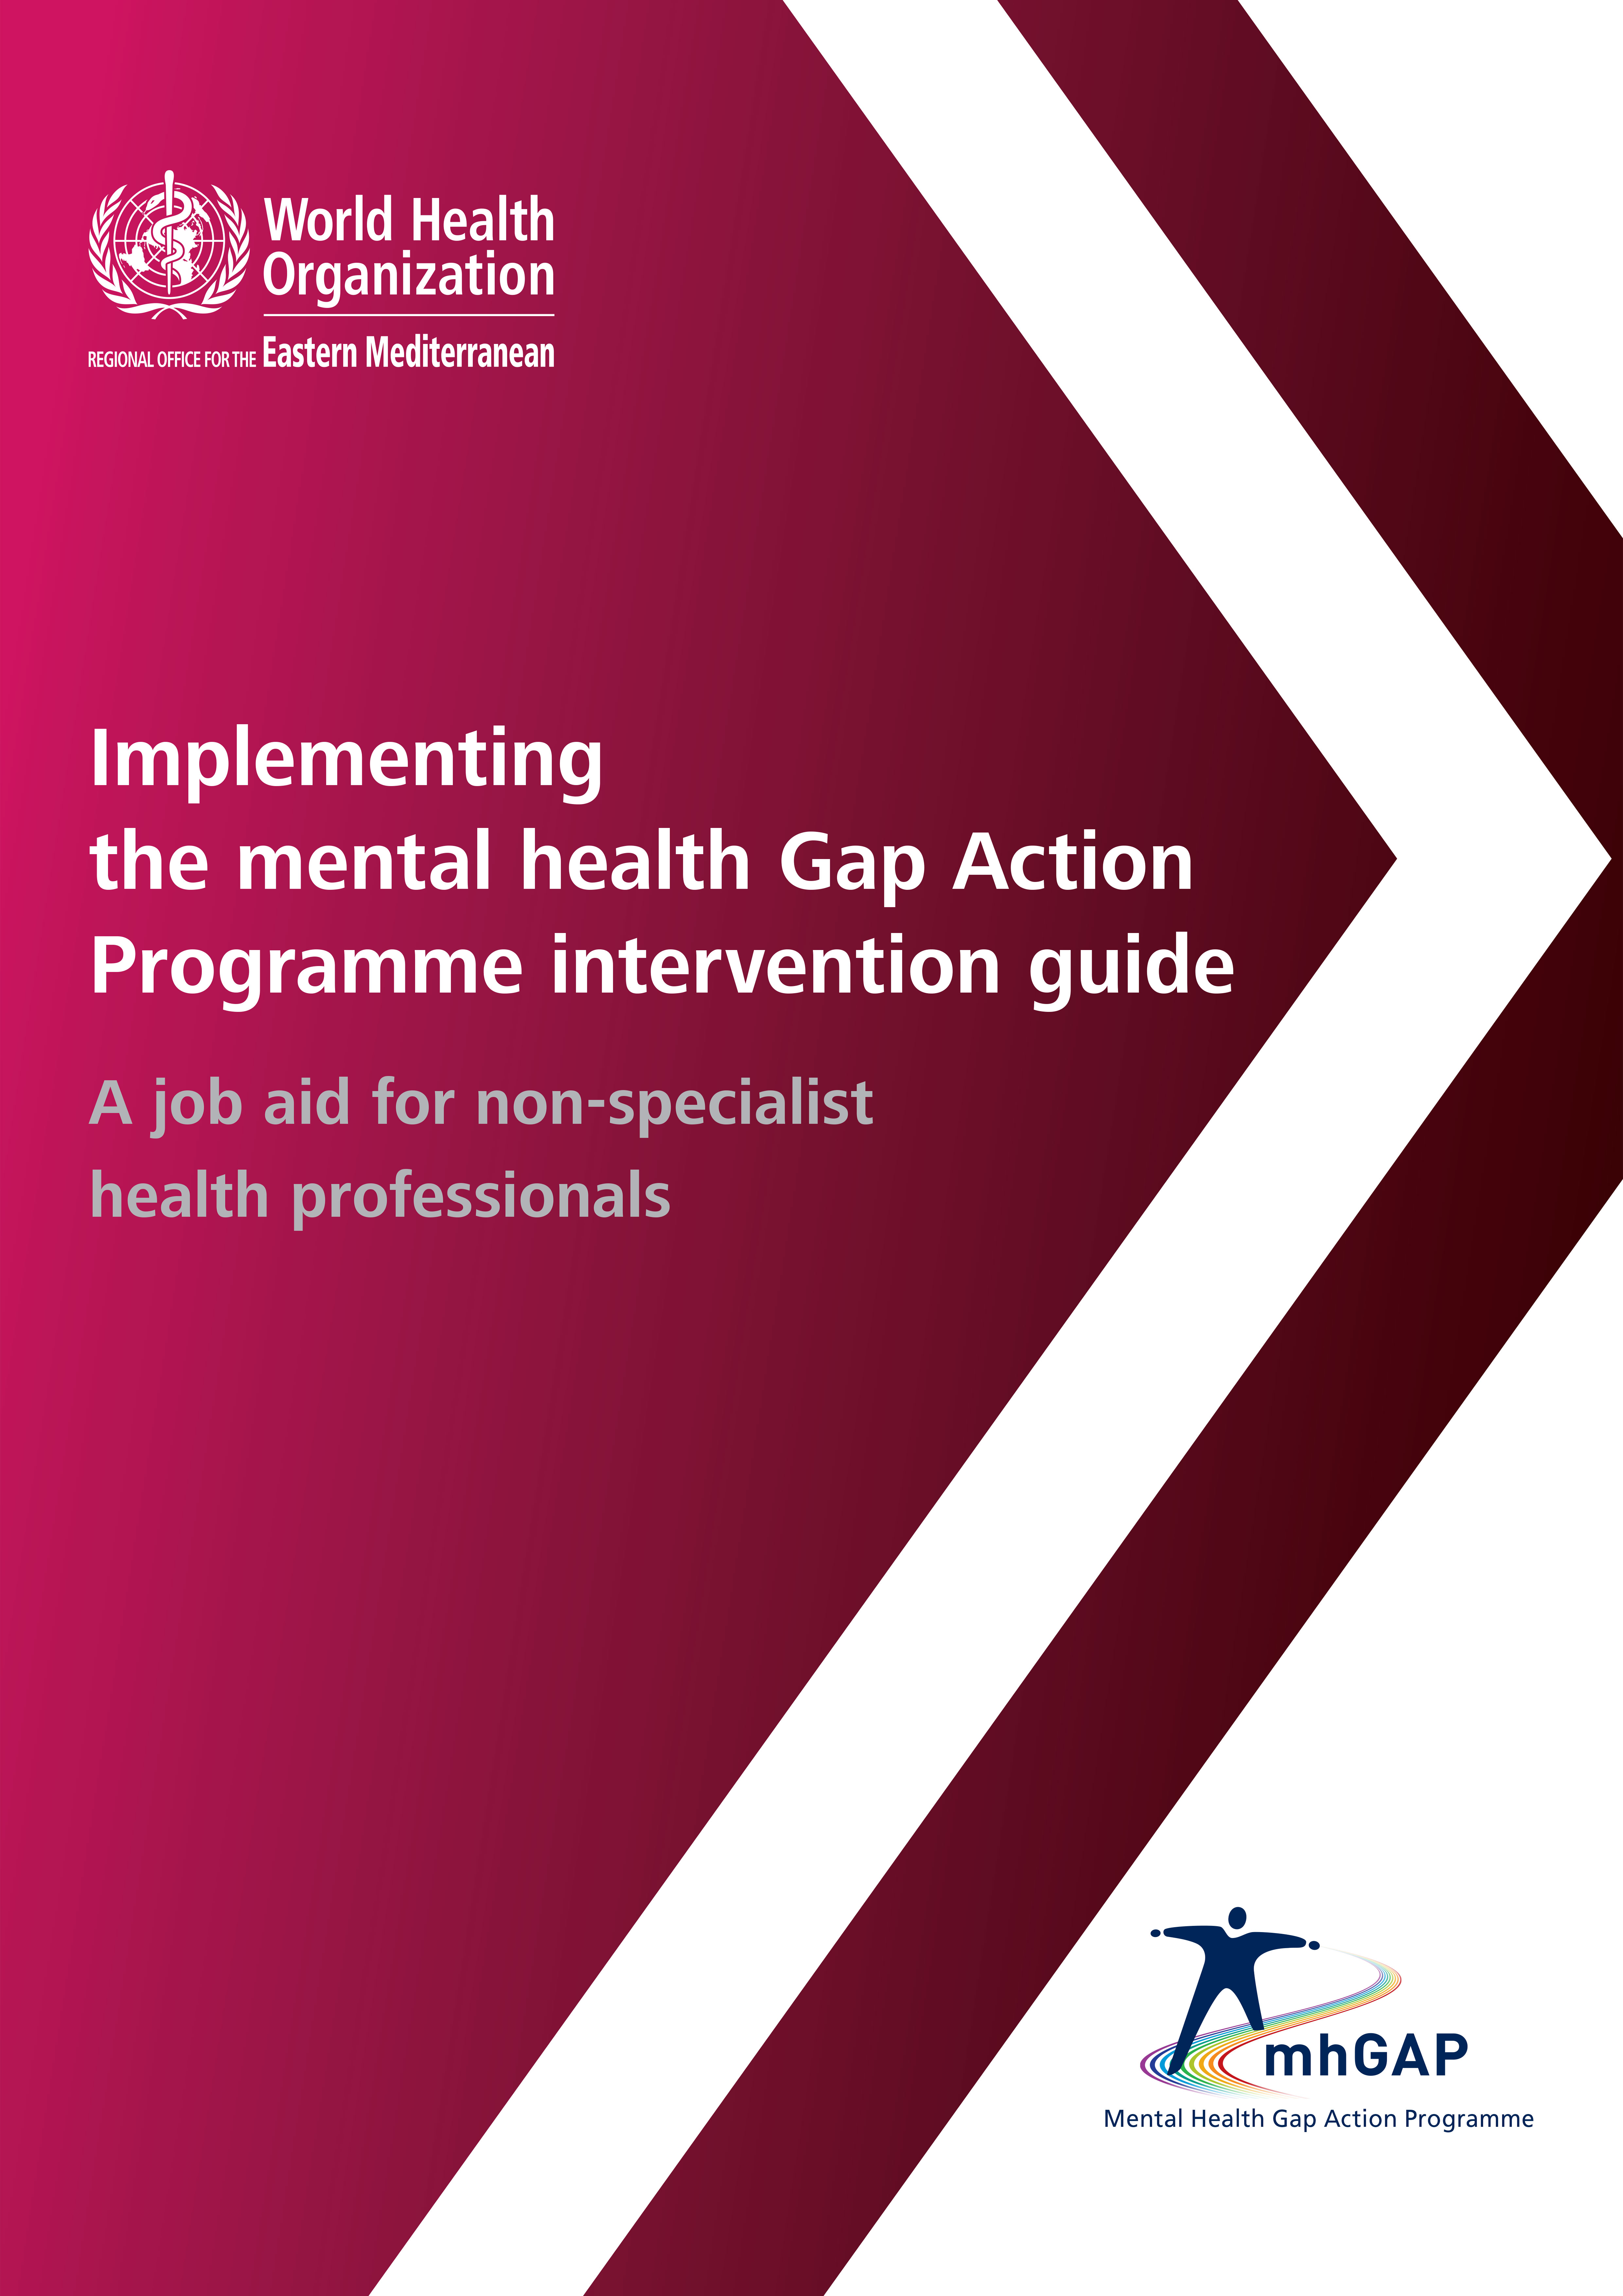 Implementing the mental health Gap Action Programme intervention guide: a job aid for non-specialist health professionals